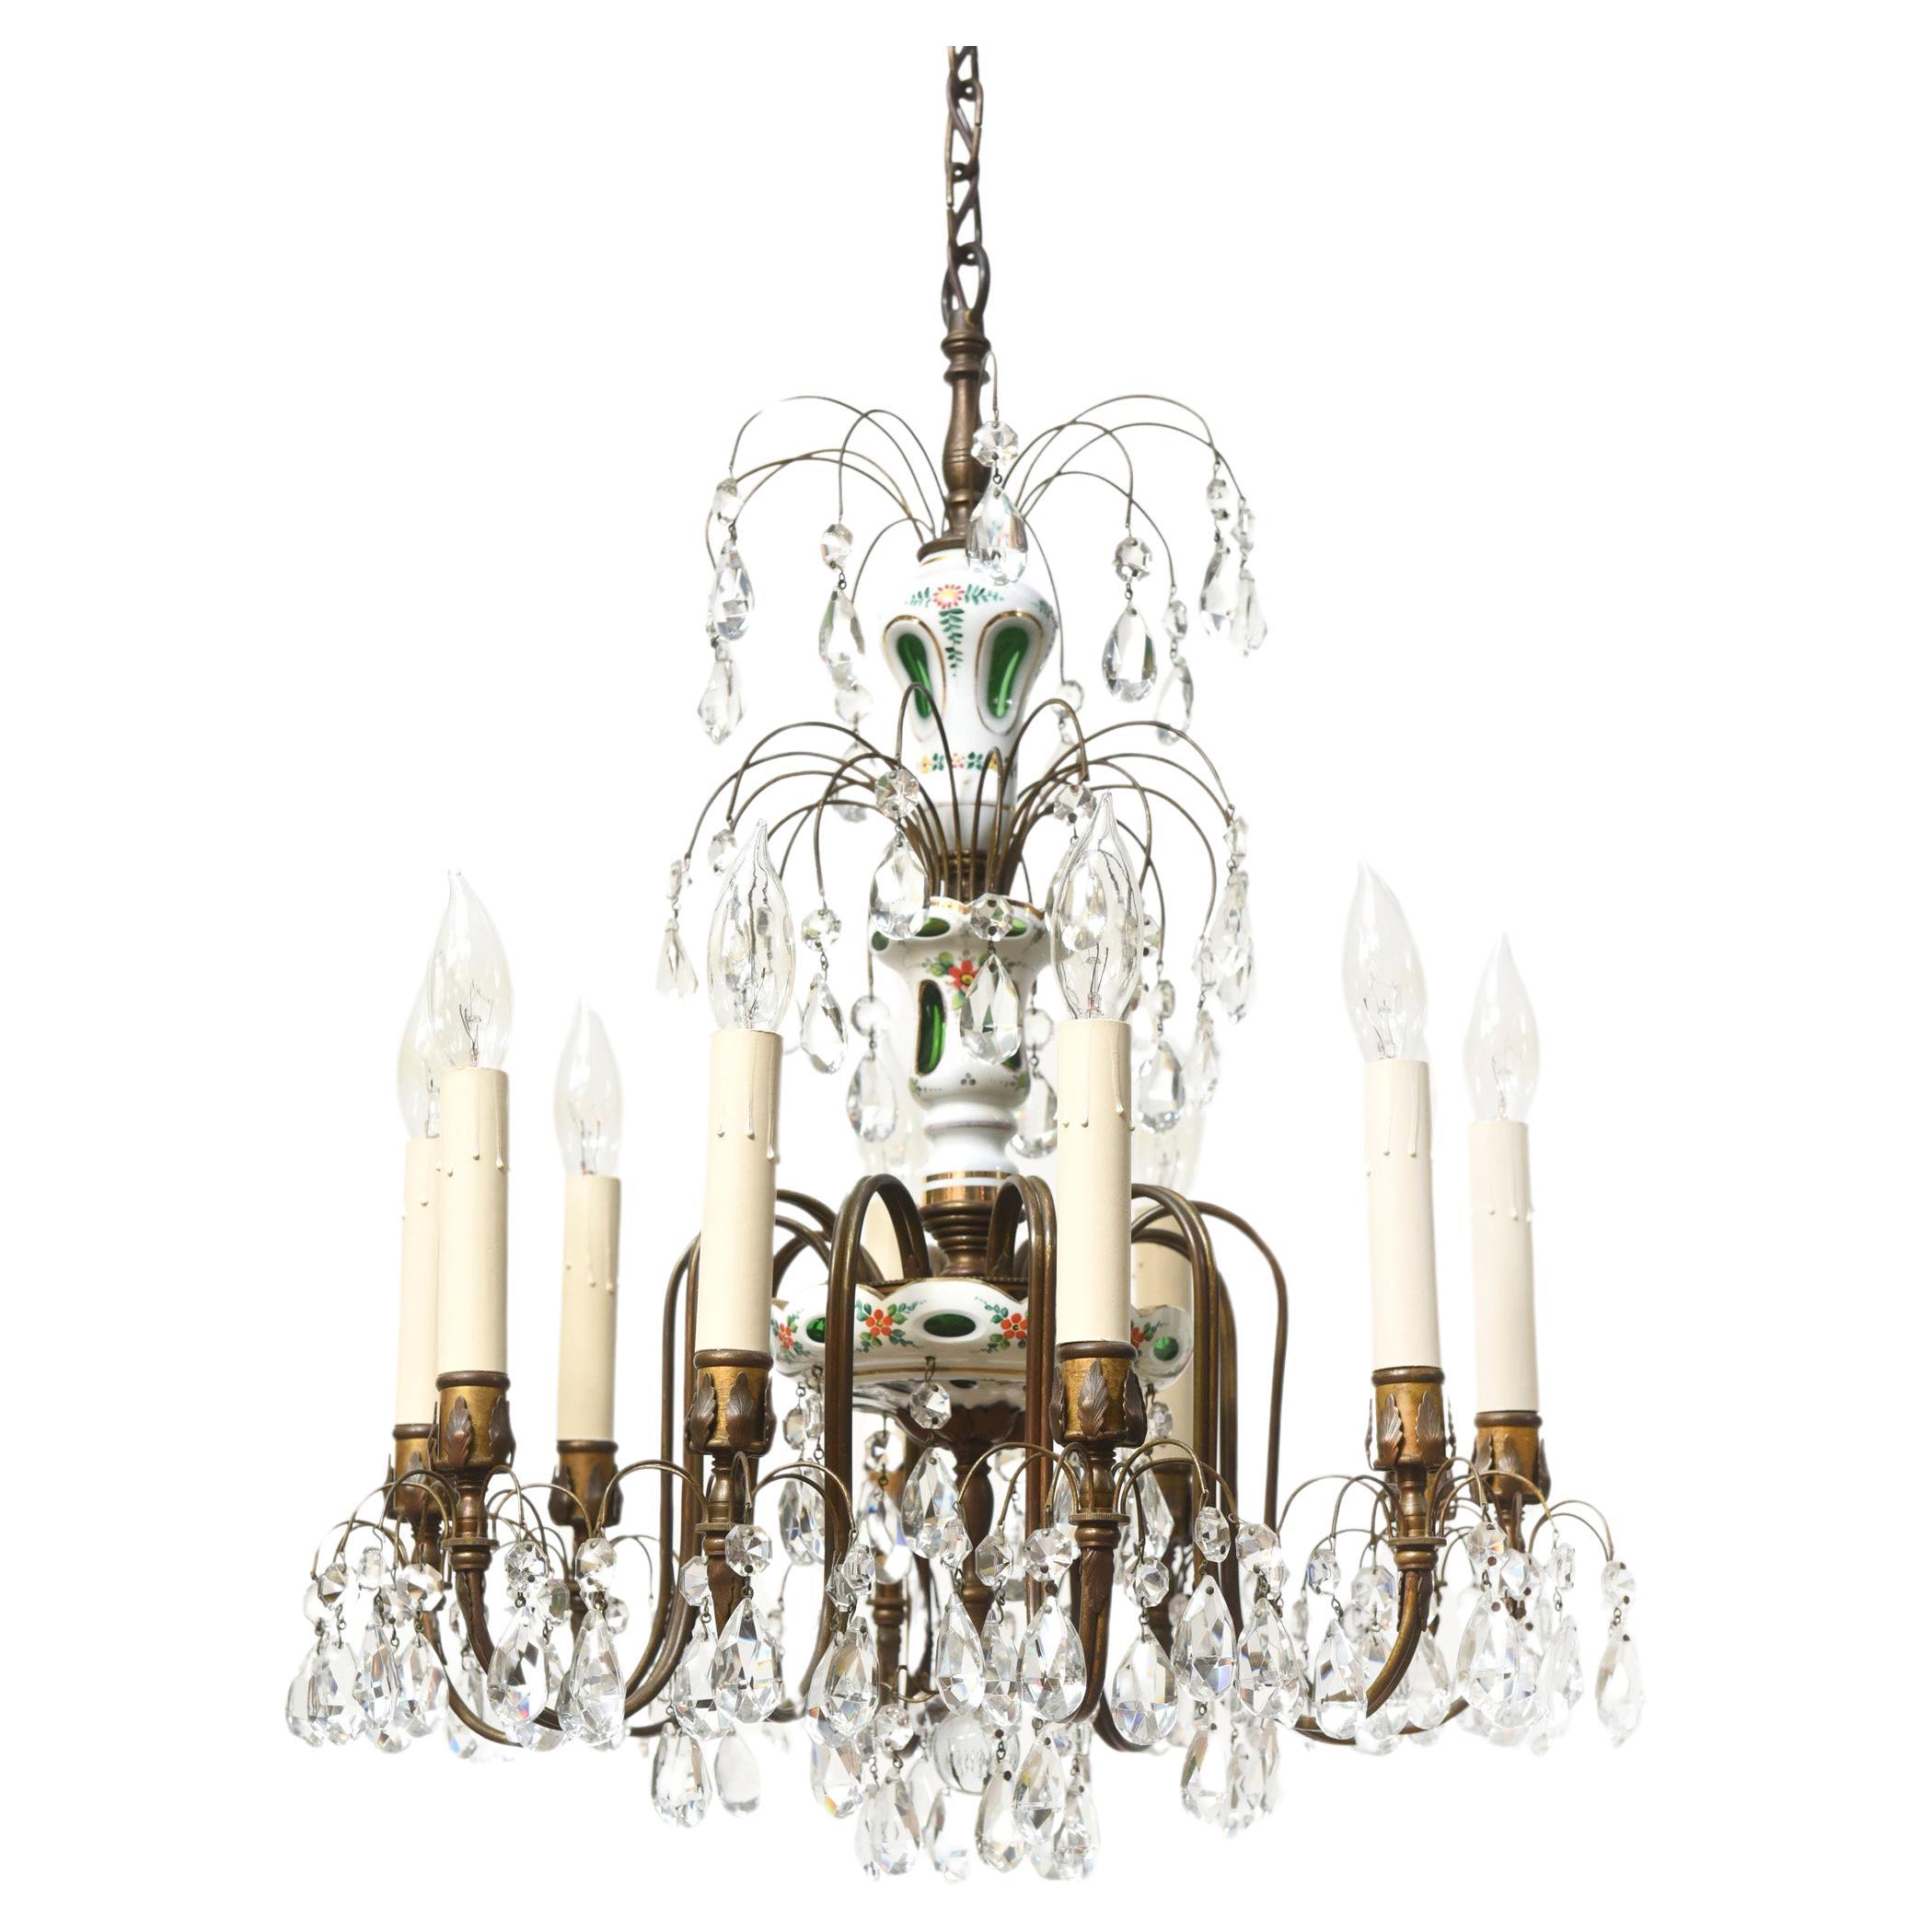 Early 20th Century Glass Overlay Chandelier with Brass and Crystals